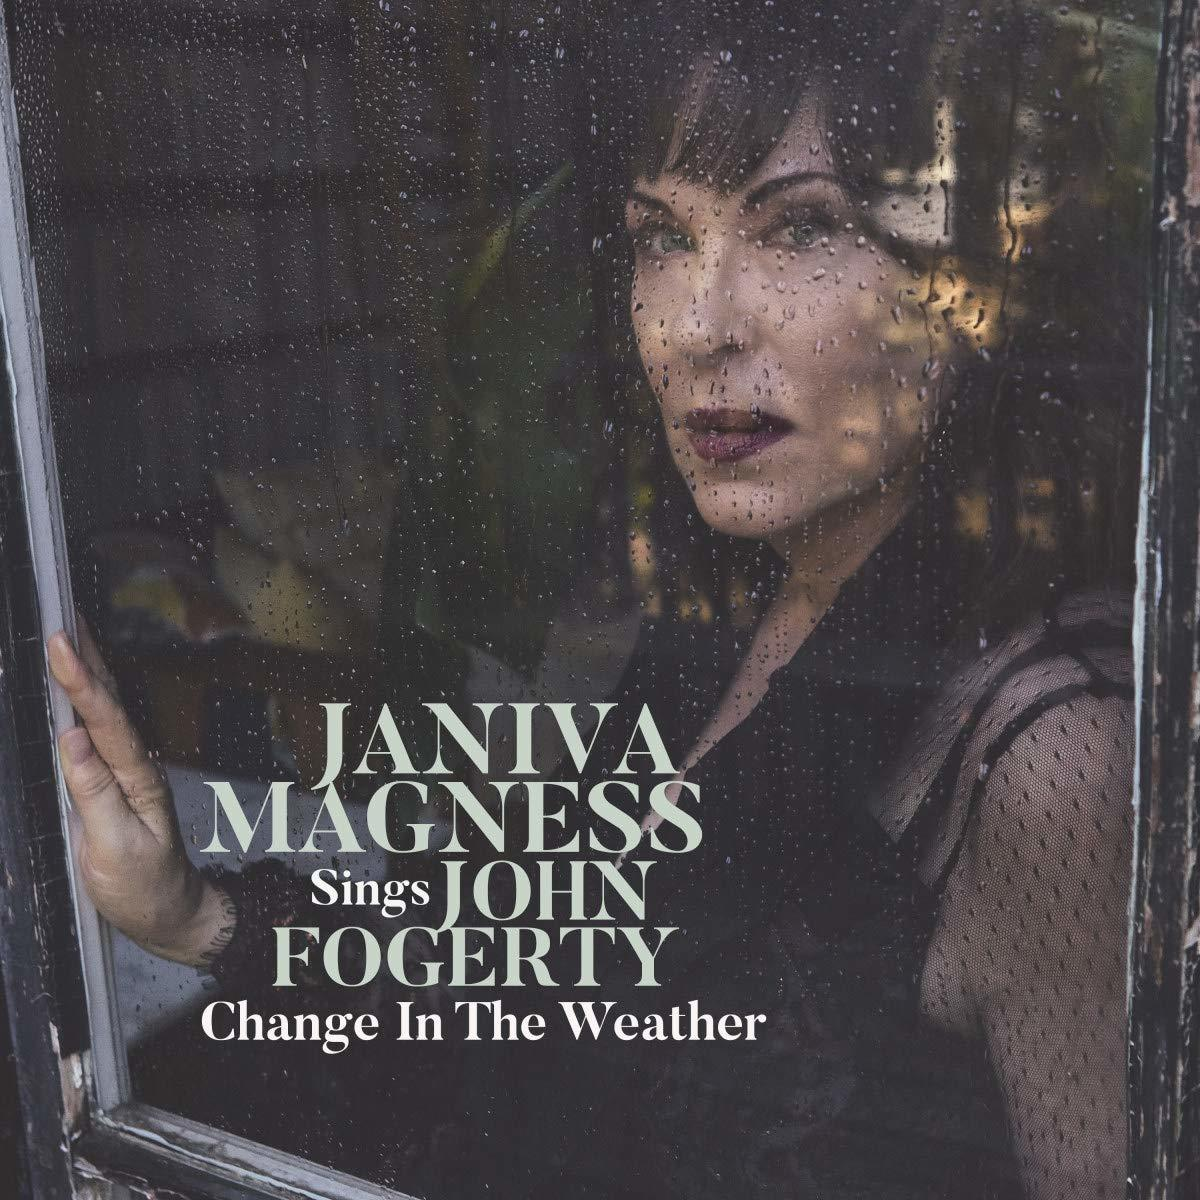 (CD) - Janiva - In The Magness Weather Change